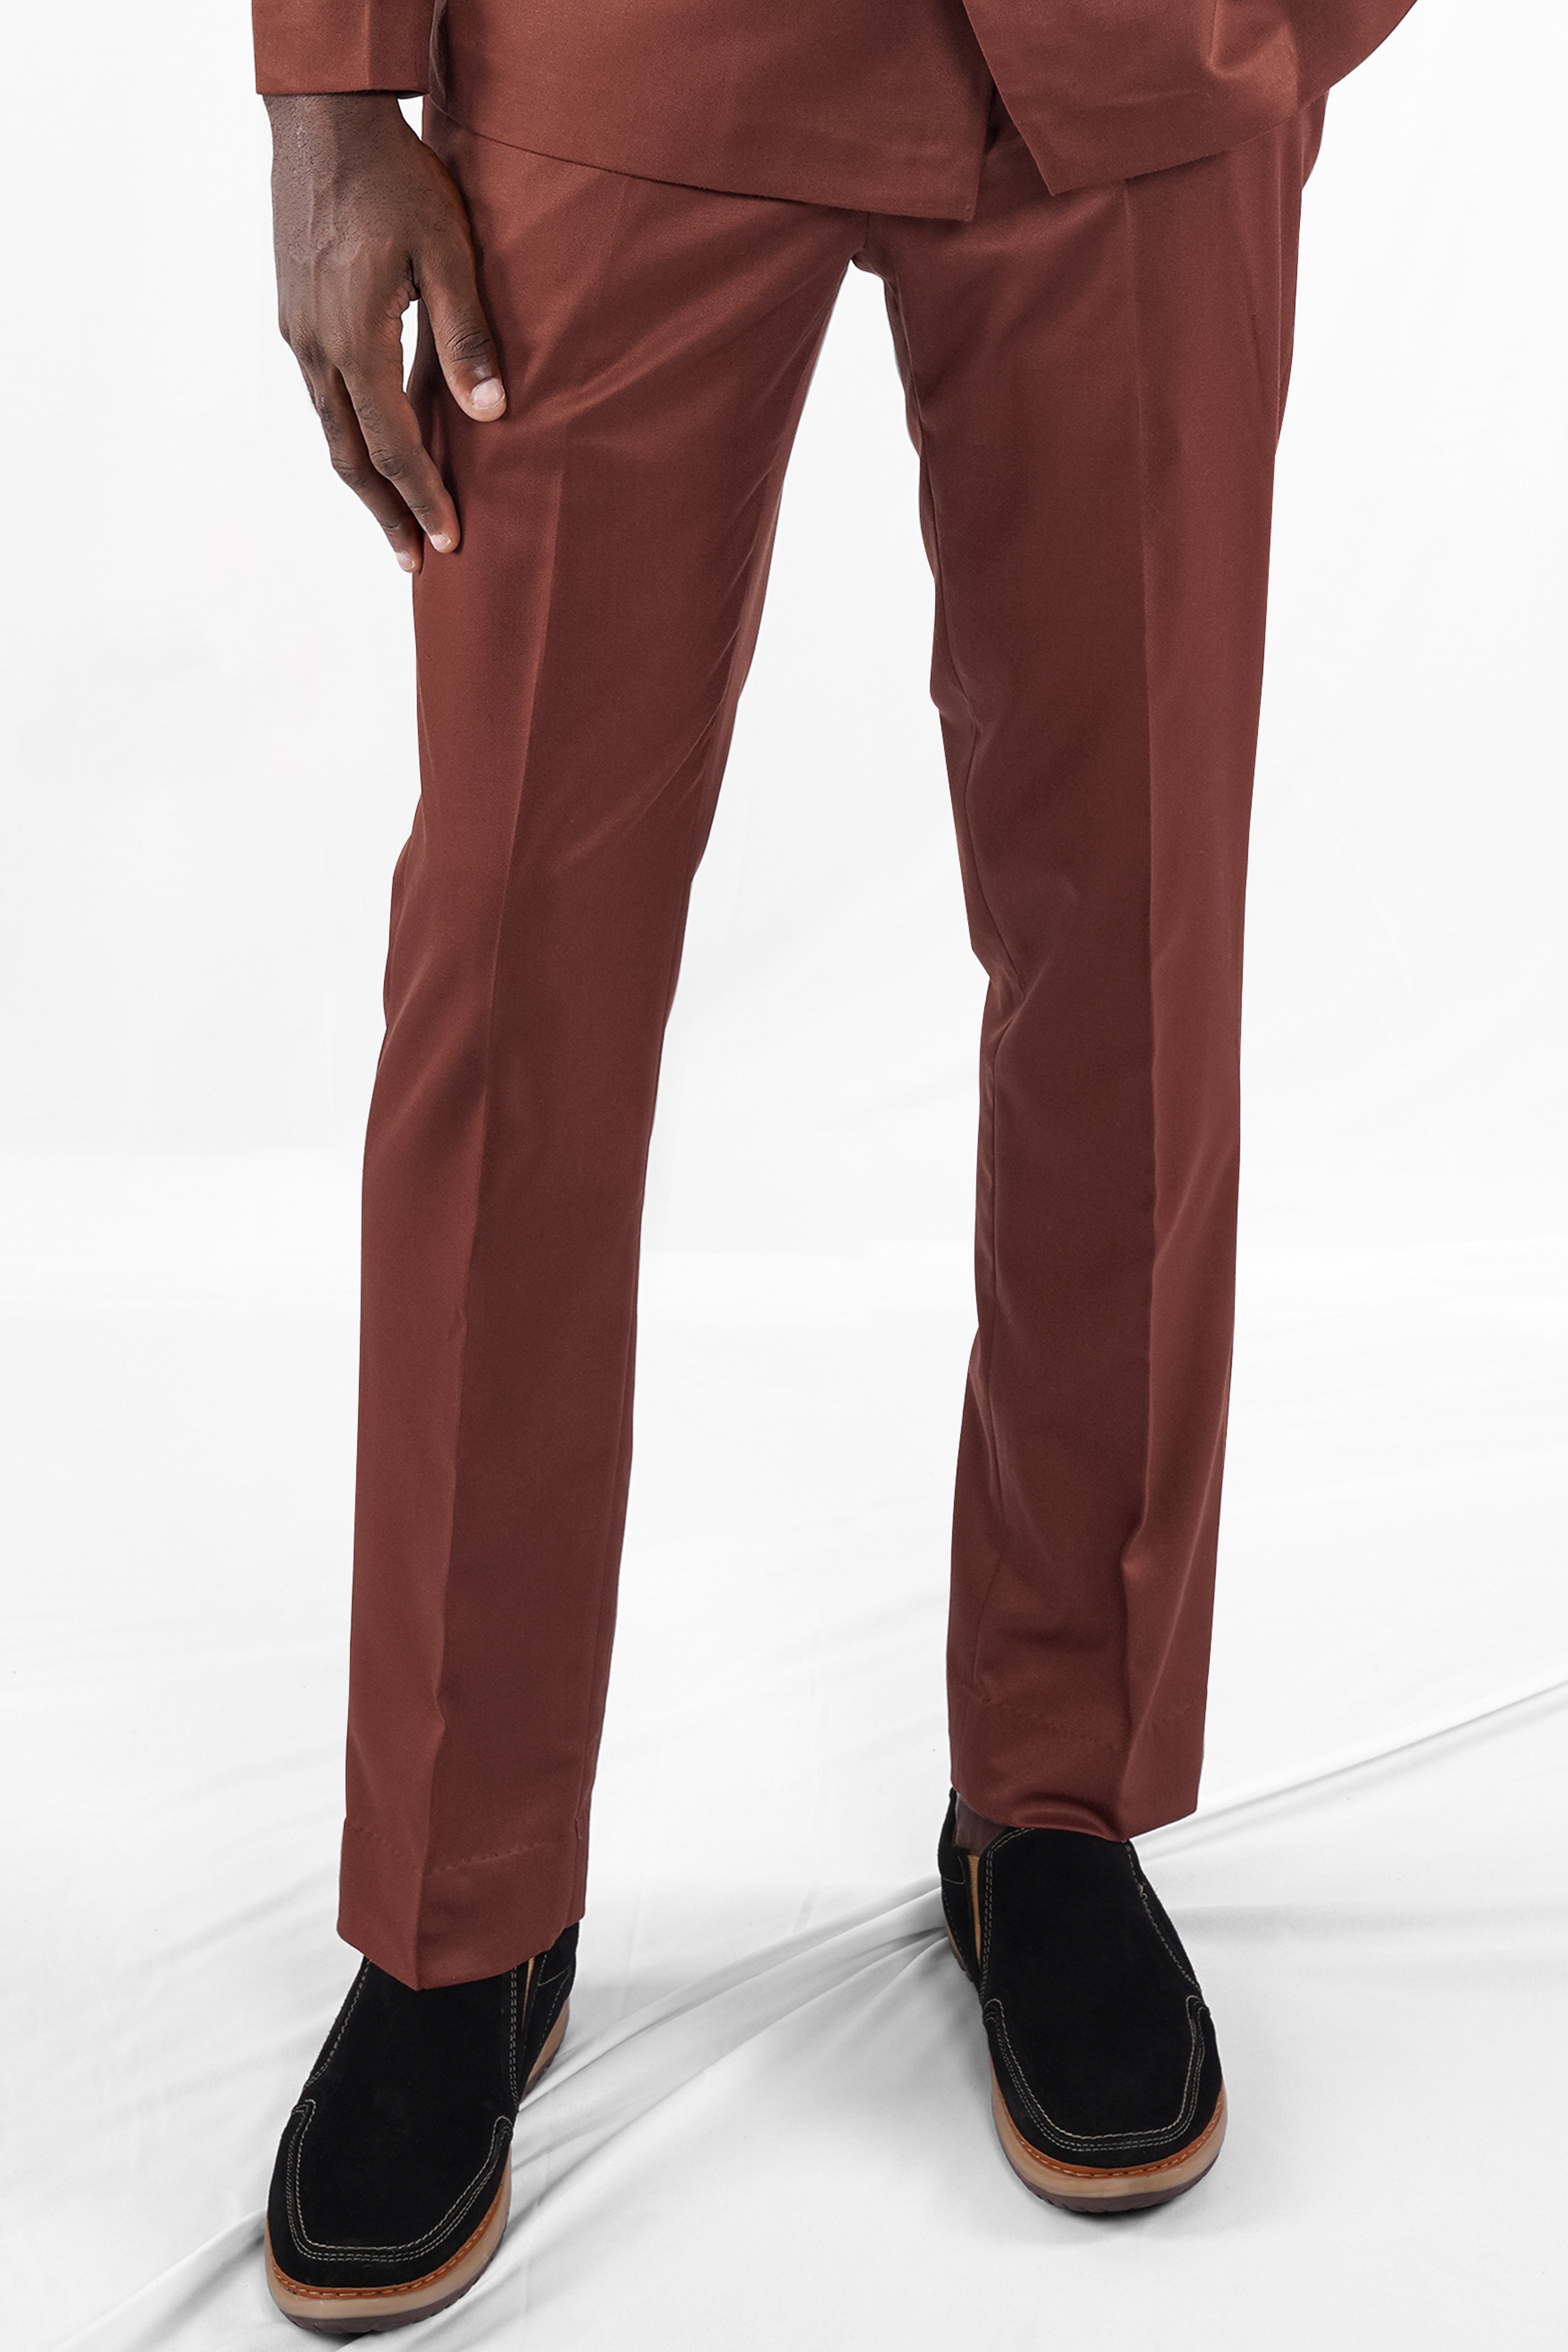 Ironstone Red Stretchable traveler Pant T2697-28, T2697-30, T2697-32, T2697-34, T2697-36, T2697-38, T2697-40, T2697-42, T2697-44